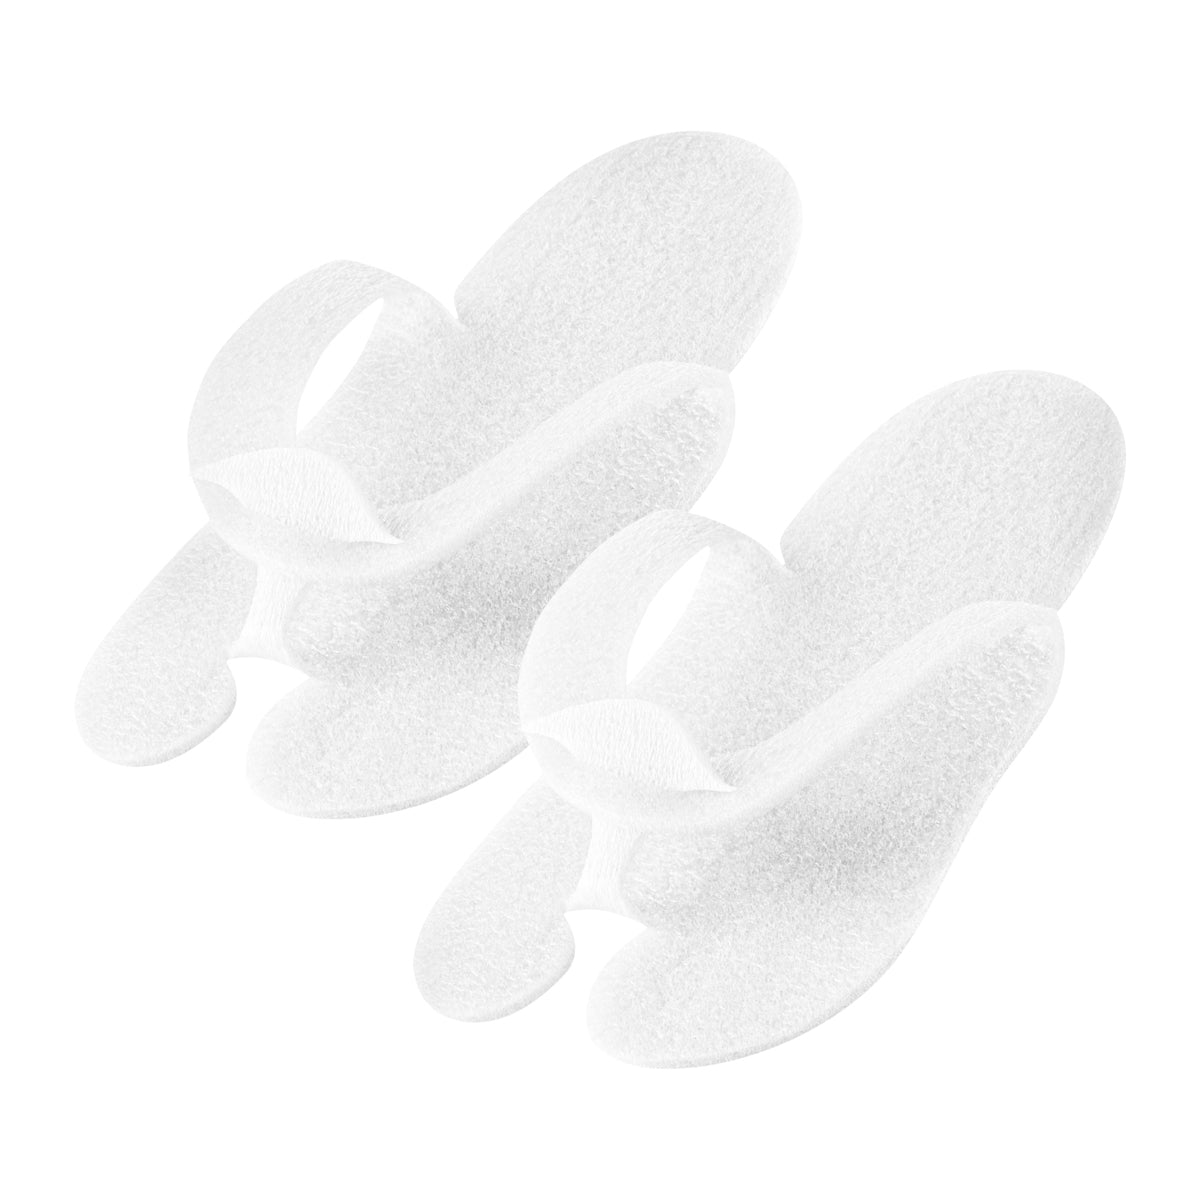 ACTIVESHOP DISPOSABLE SLIPPERS 12 PAIRS